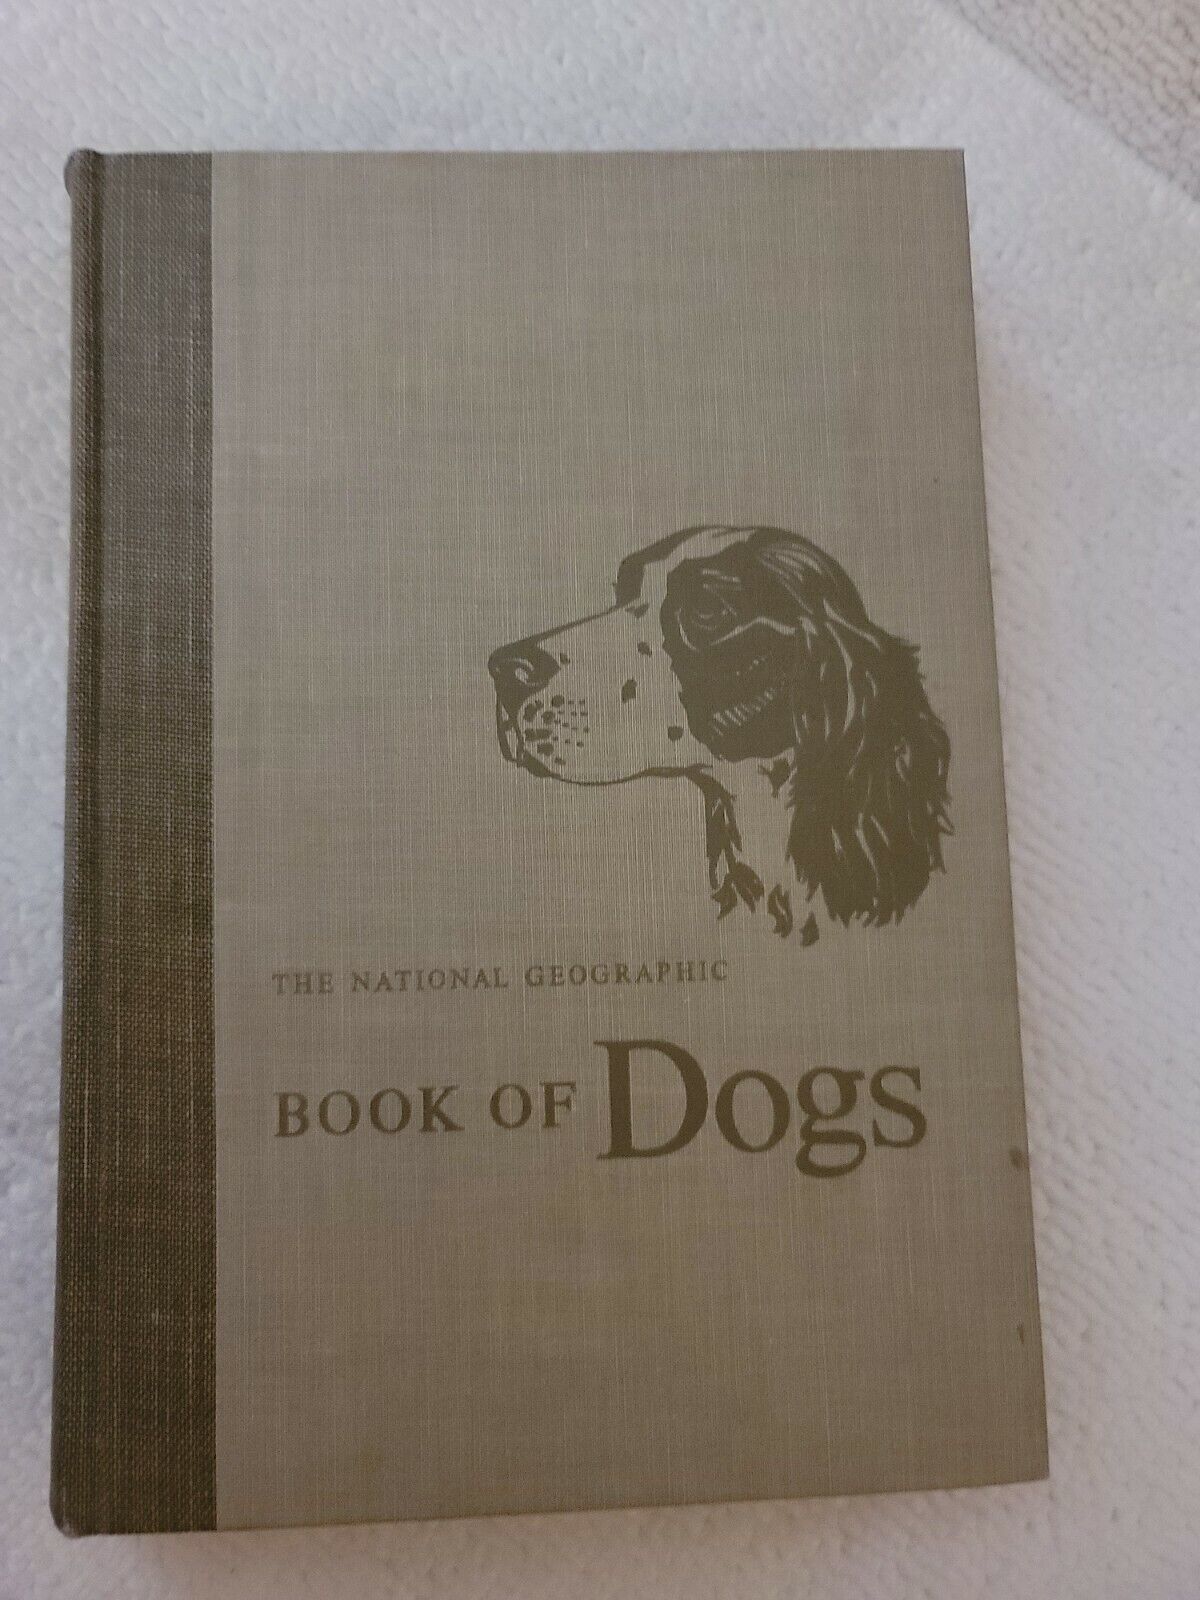 Primary image for "The National Geographic Book of Dogs" HB 430 Pages Vintage 1958 First Edition